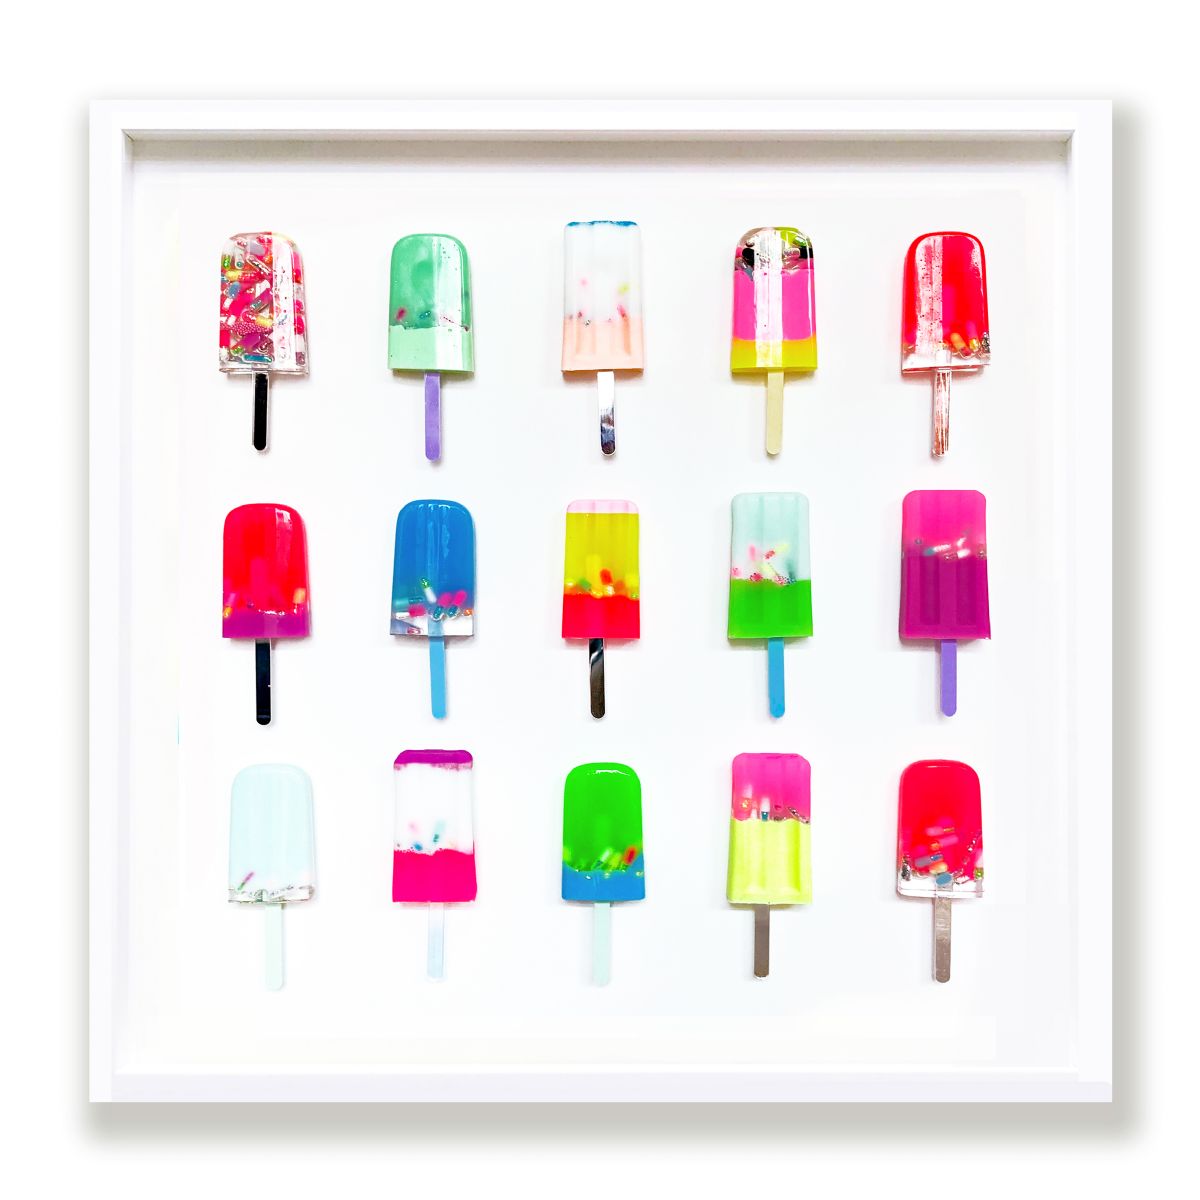 Lolly Pills by Emma Gibbons